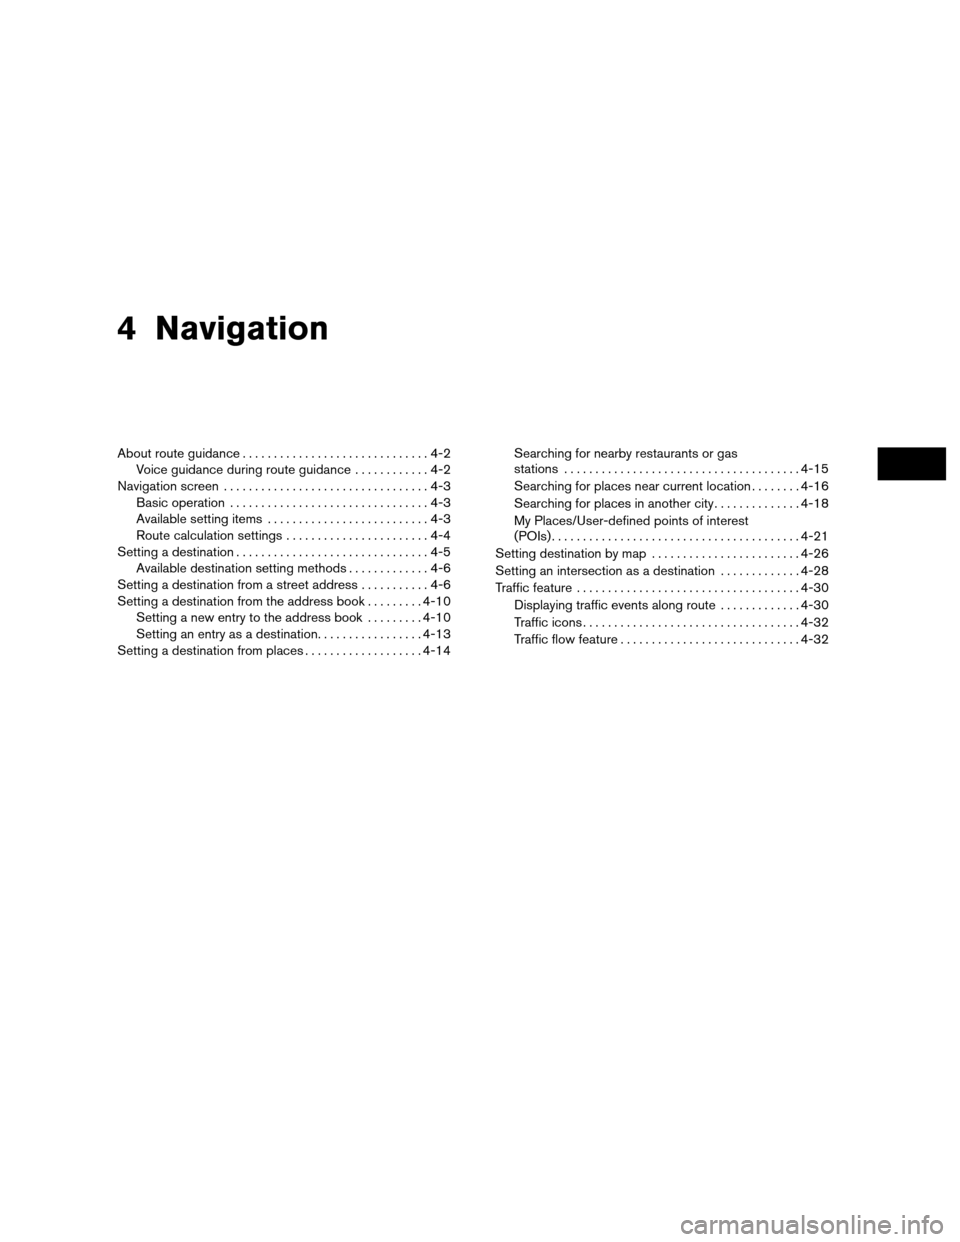 NISSAN VERSA 2010 1.G LC Navigation Manual 4 Navigation
About route guidance..............................4-2
Voice guidance during route guidance ............4-2
Navigation screen .................................4-3
Basic operation .........